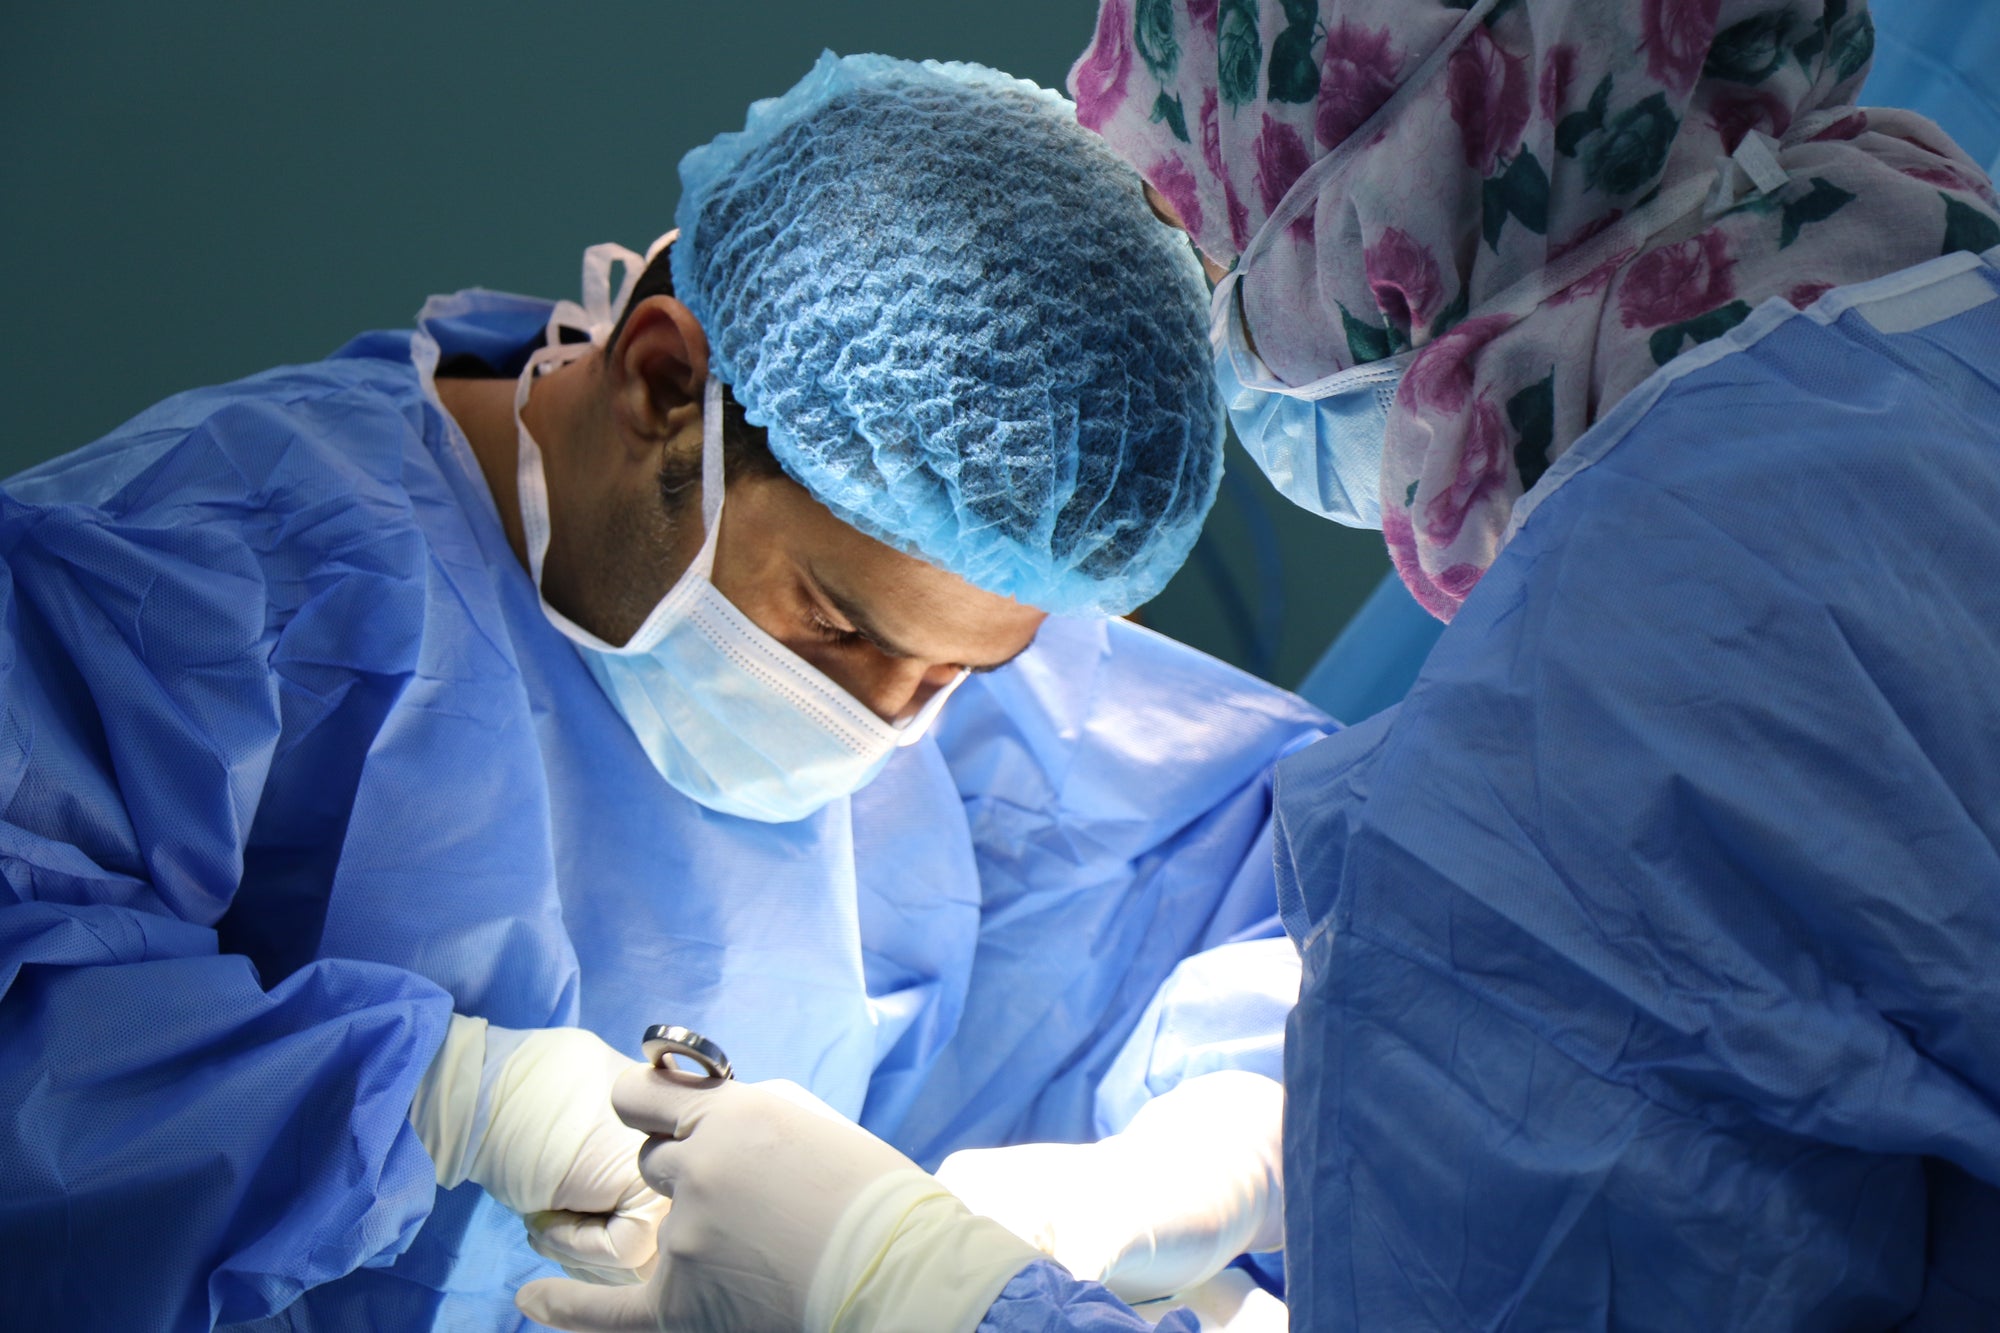 a doctor performing surgery on a patient